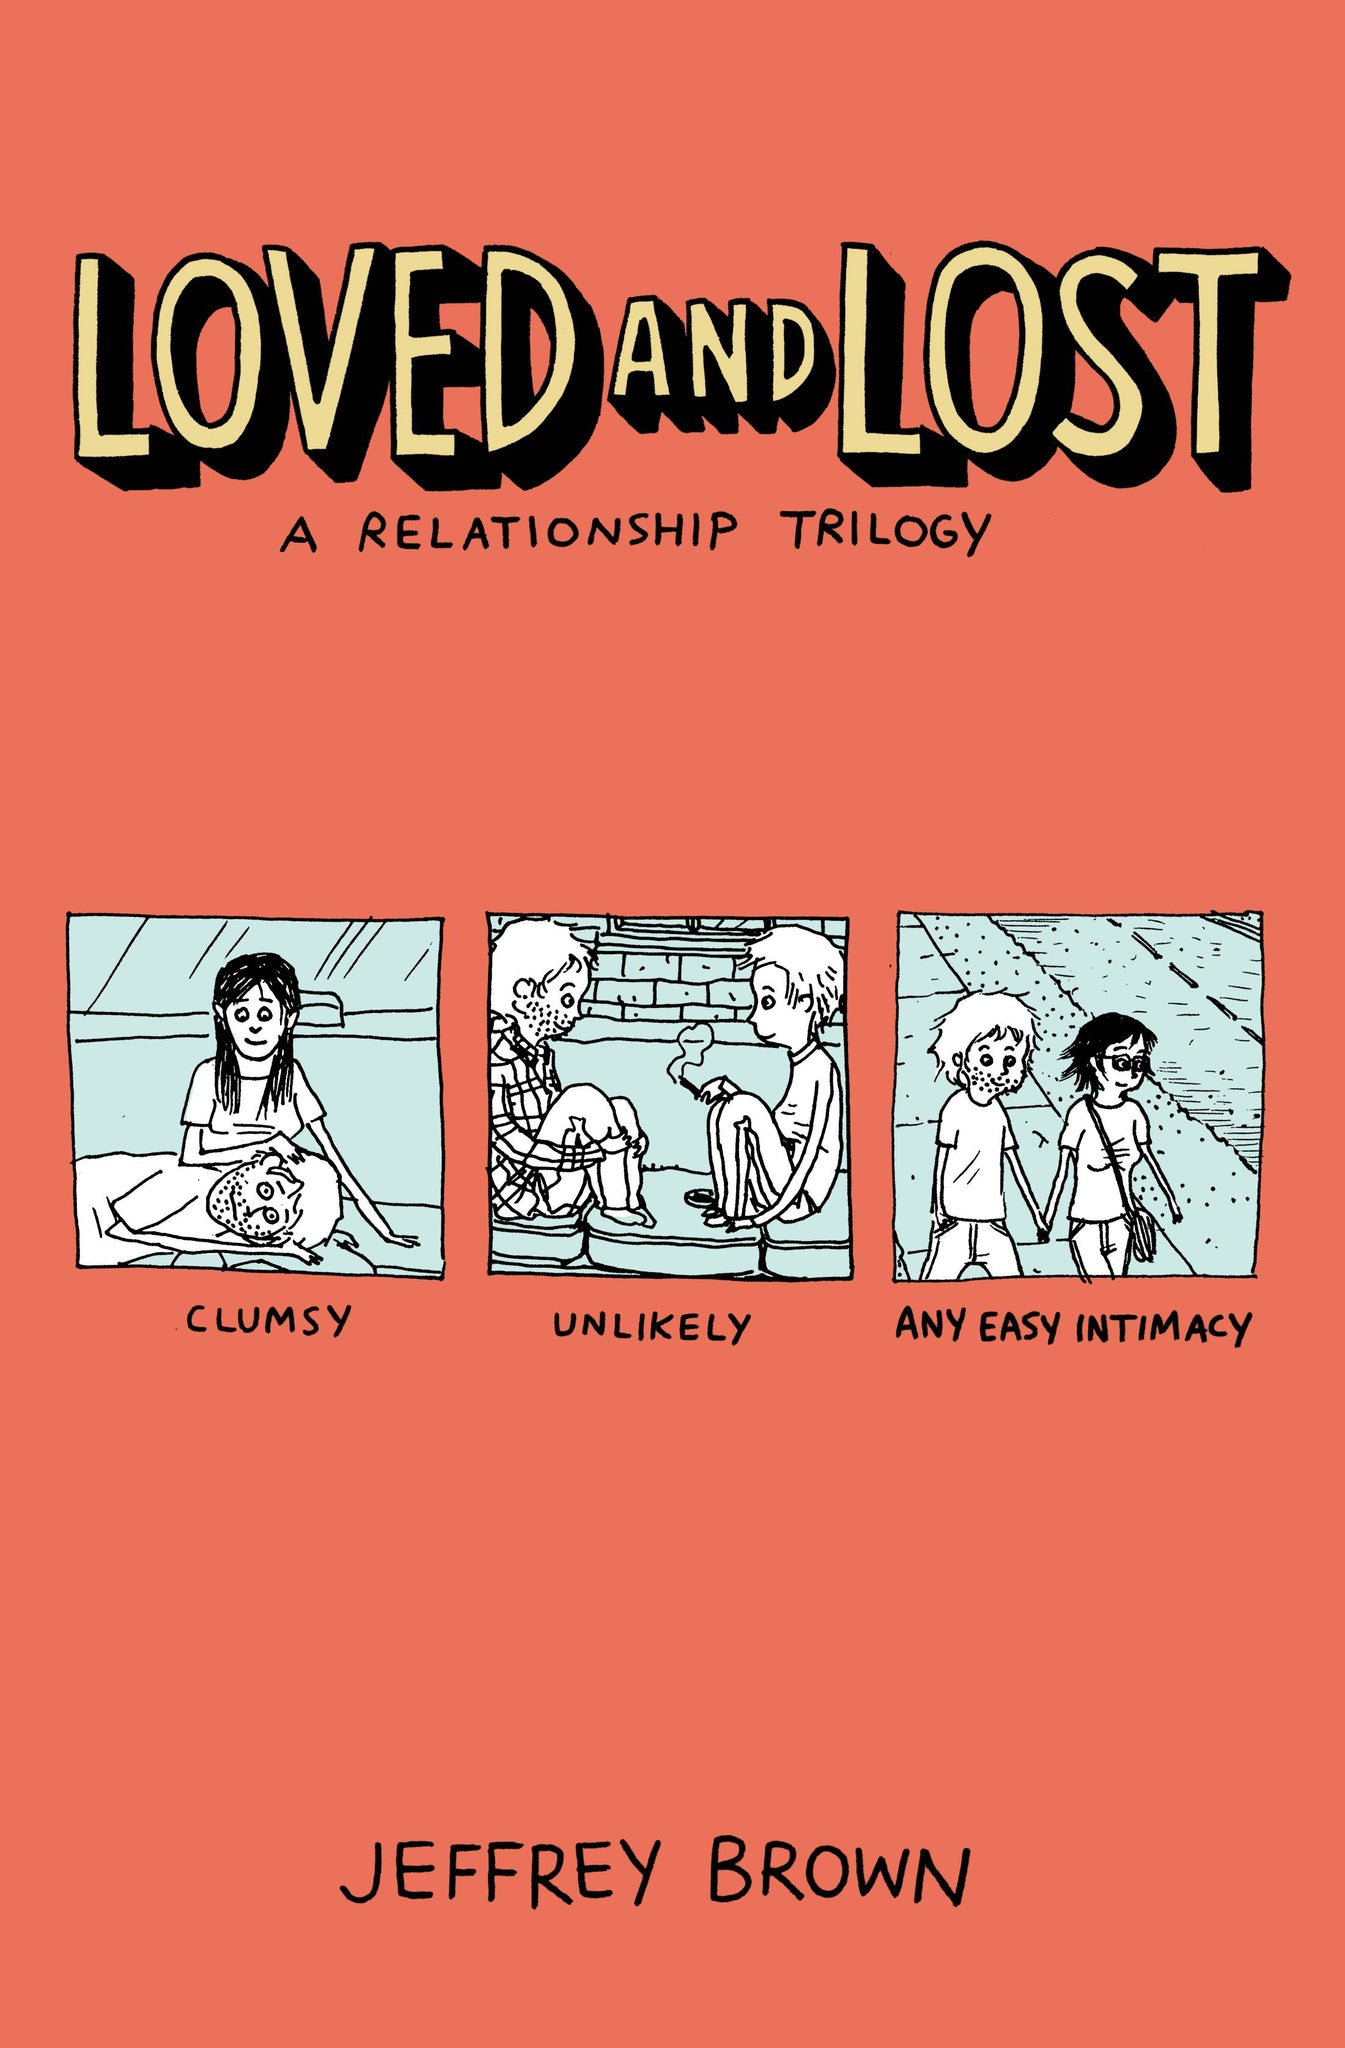 Loved and Lost Relationship Trilogy